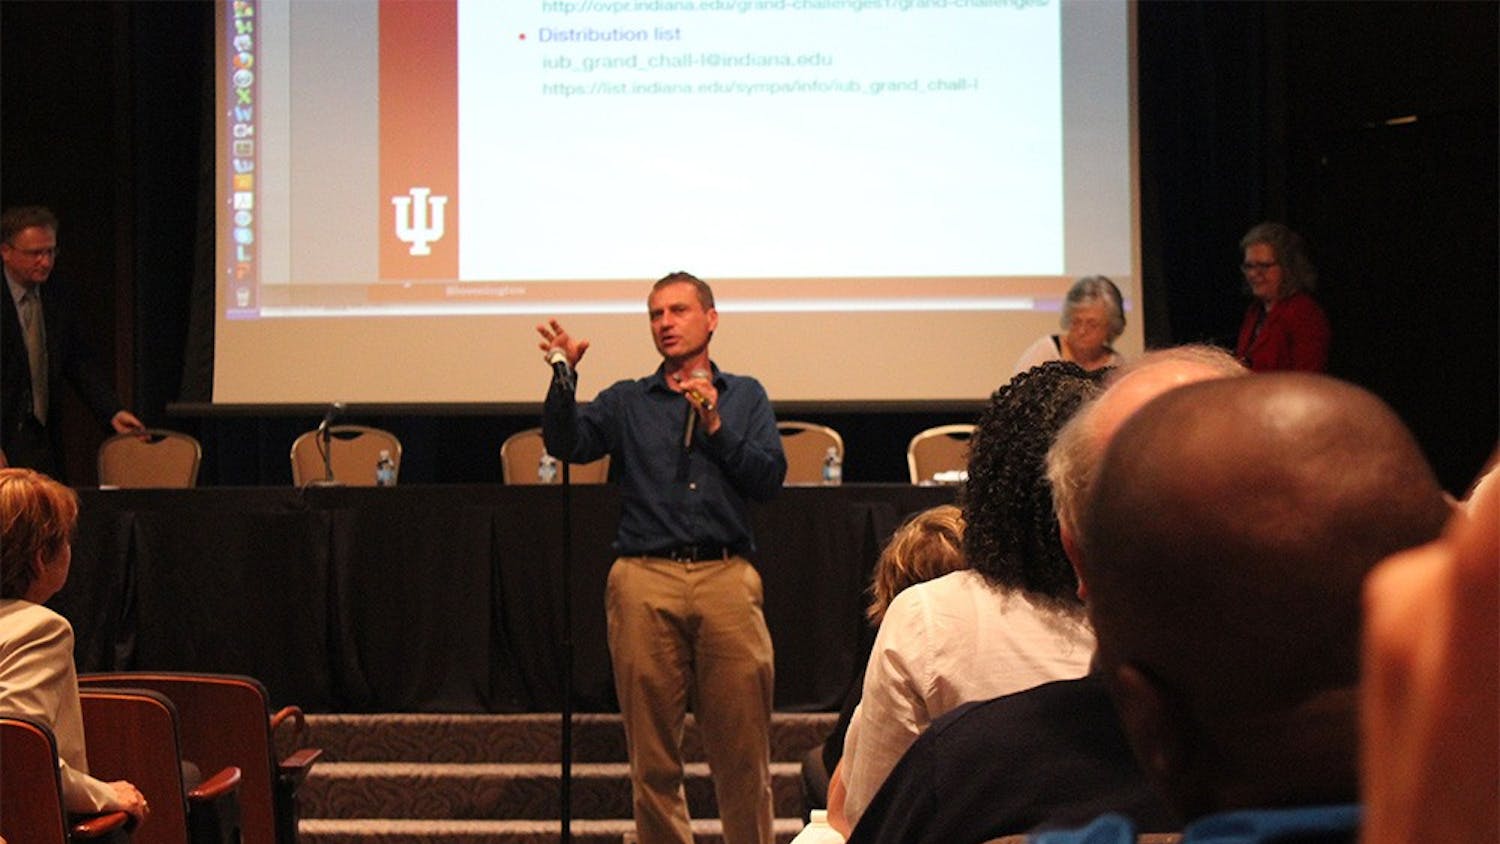 Rick Van Kooten, interim vice provost for research, lays out the plans for IU's Grand Challenges selection process at the open town hall meeting in Whittenberger Auditorium Monday. IU will choose five Grand Challenges proposed by faculty members to strive for in the next five years. 